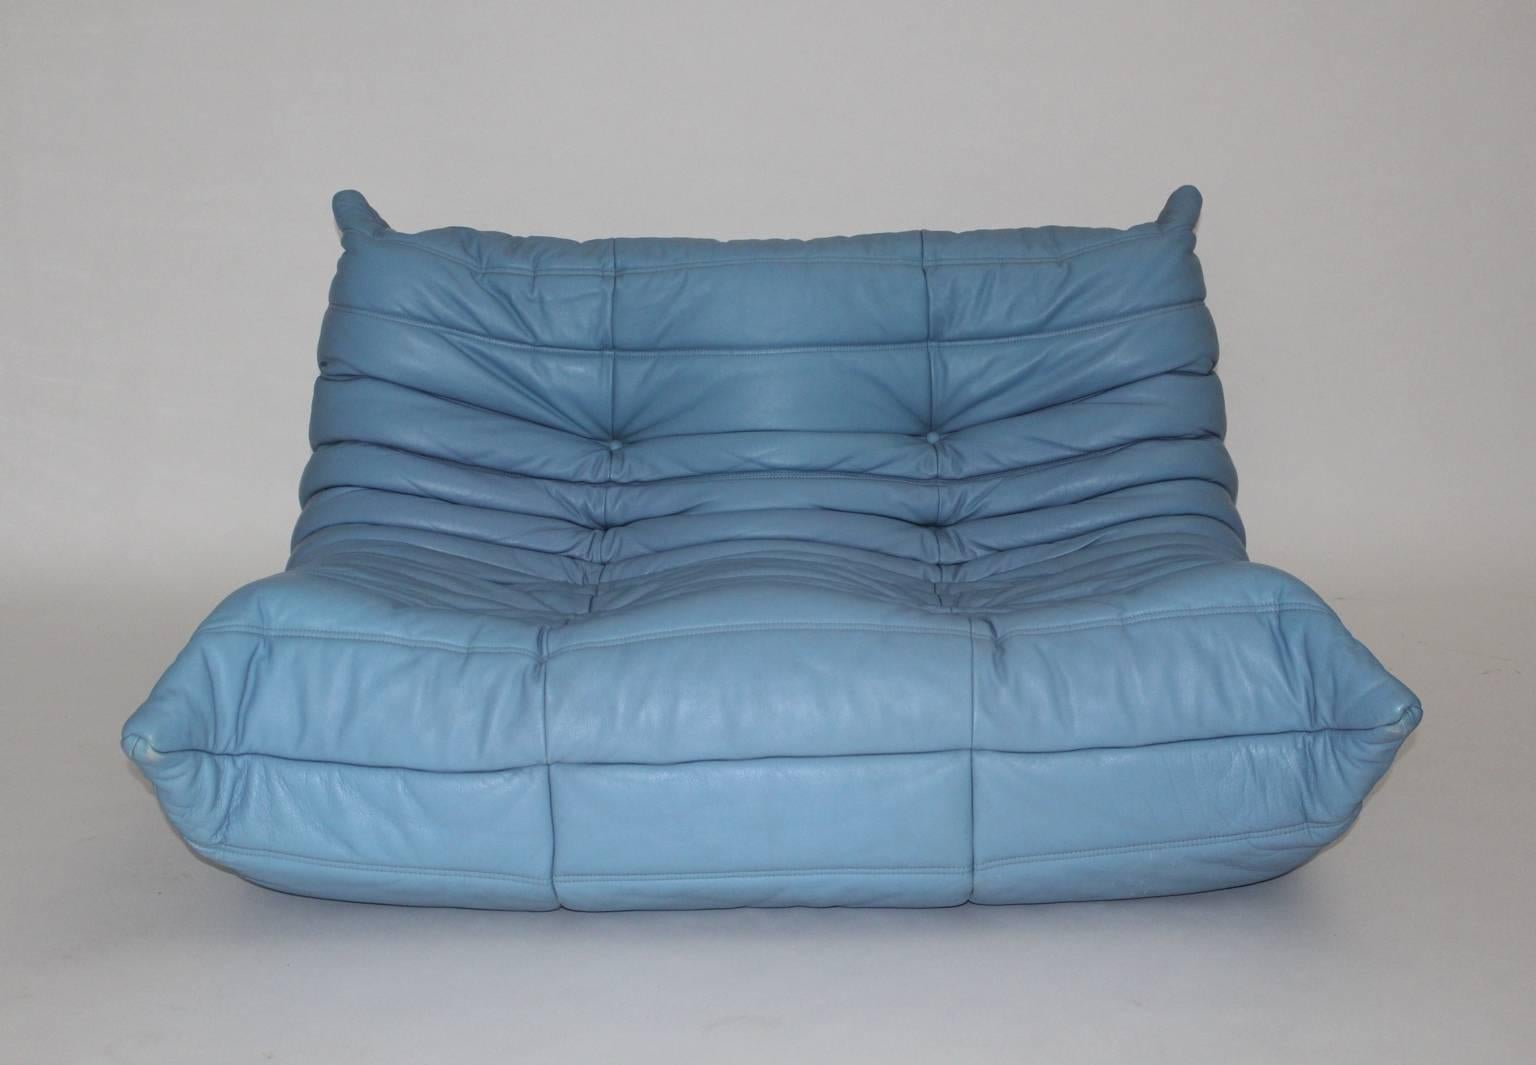 This light-blue sofa Togo was designed by Michel Ducaroy 1974, France and executed by Ligne Roset, France in the 1980s.
This loveseat is upholstered with high-quality light heaven blue leather and is in very good original condition.

Also the Sofa